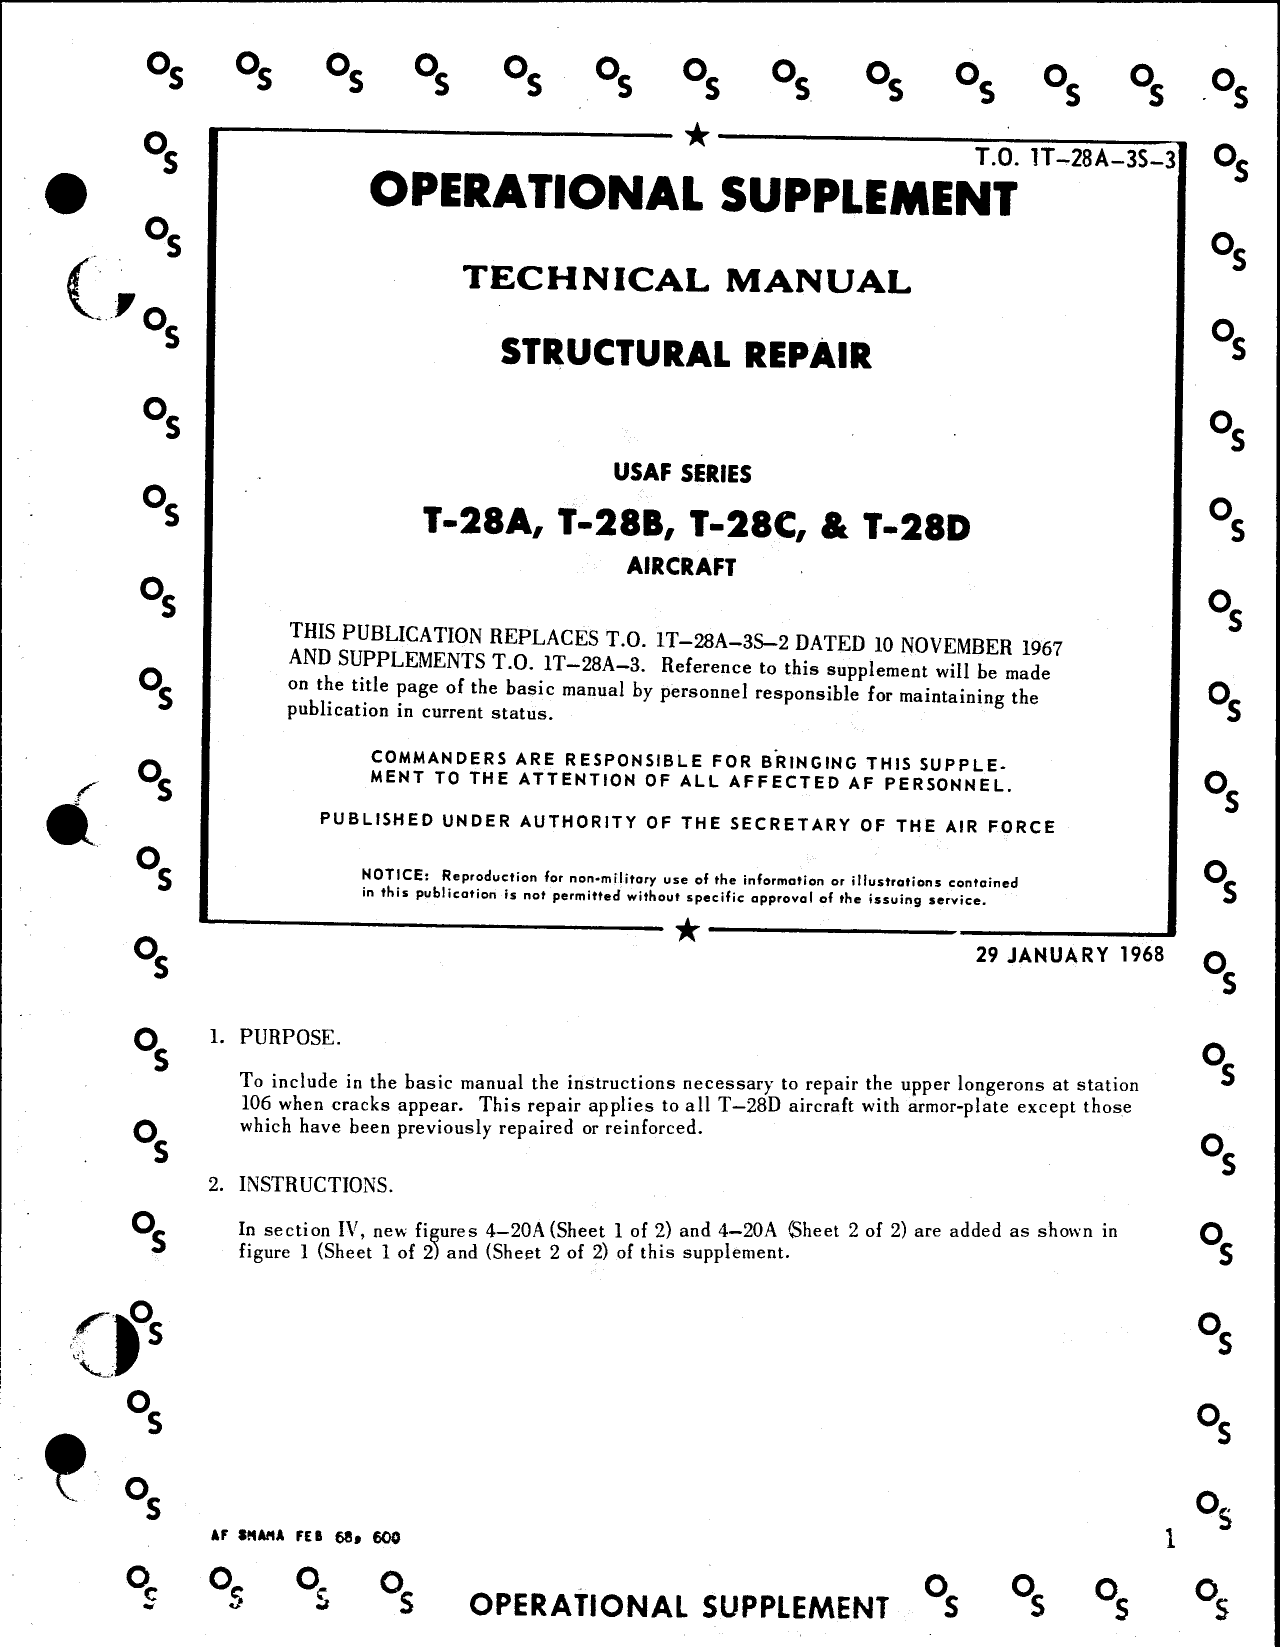 Sample page  5 from AirCorps Library document: Safety Supplement Structural Repair Tech Manual, T-28A T-28B T-28C T-28D